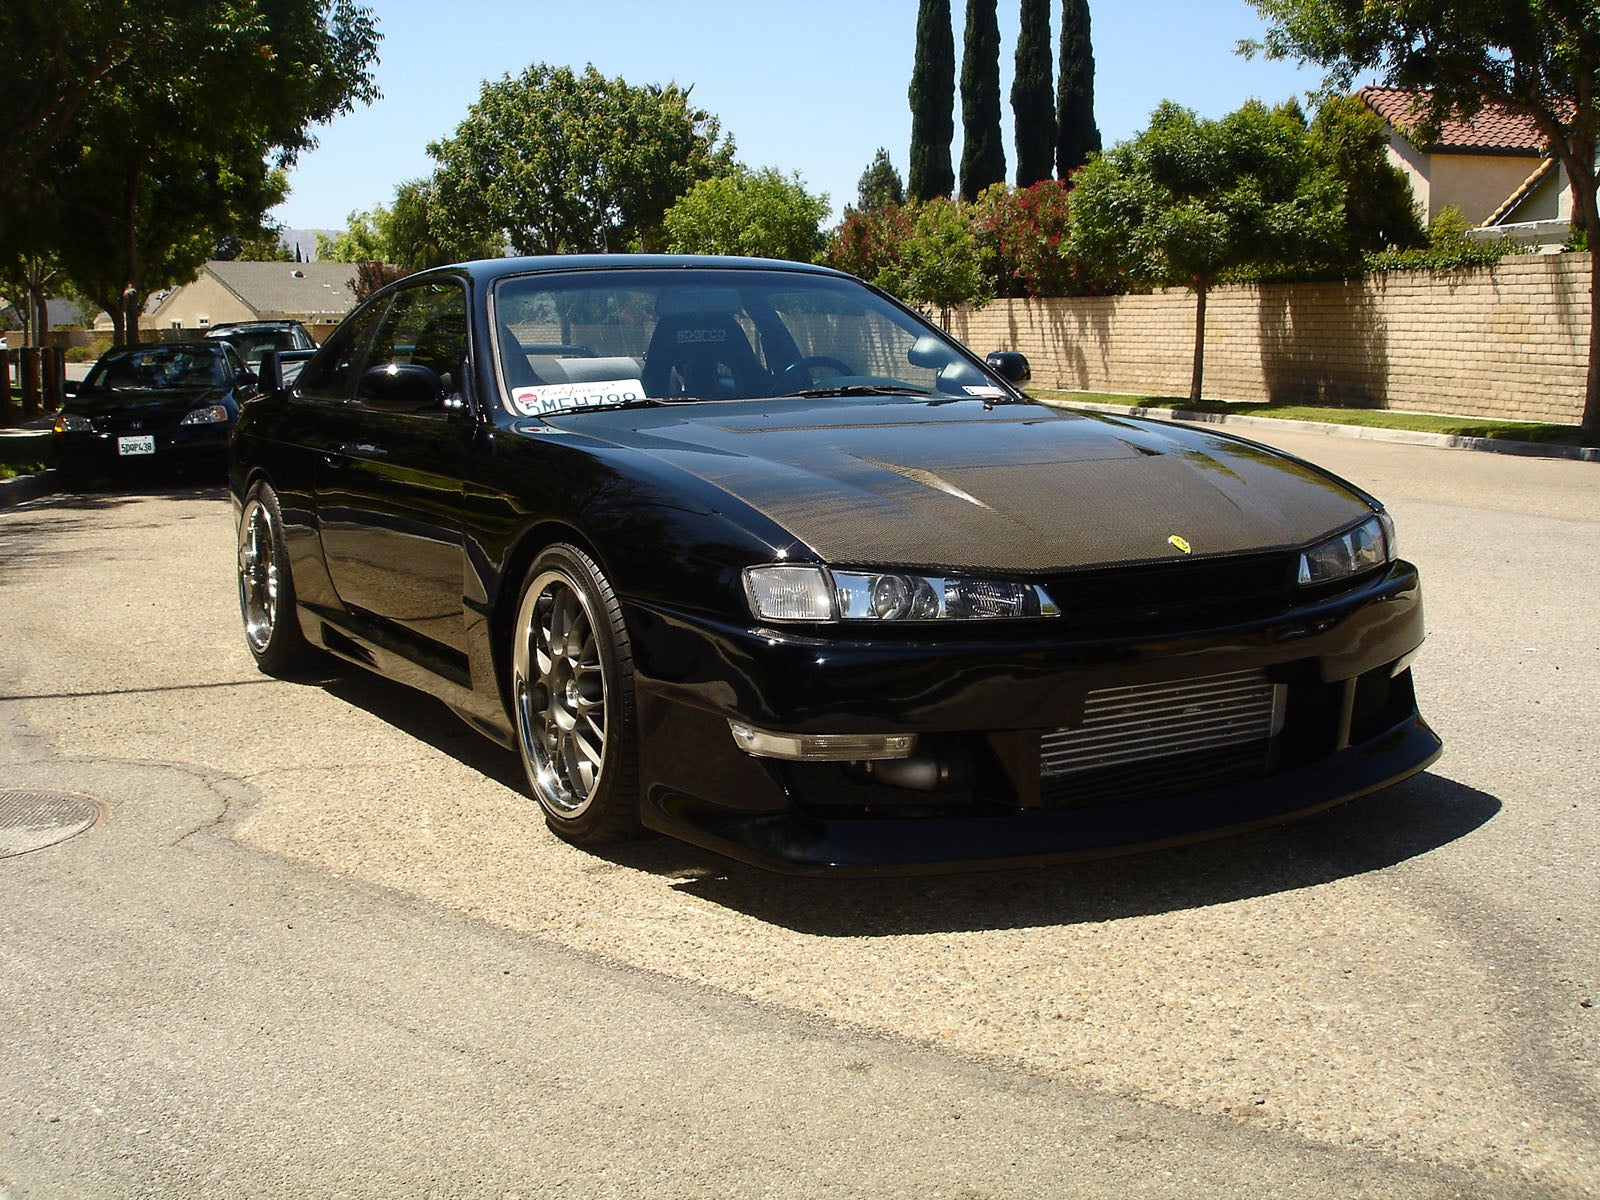 1998 Nissan 240sx for sale in california #3